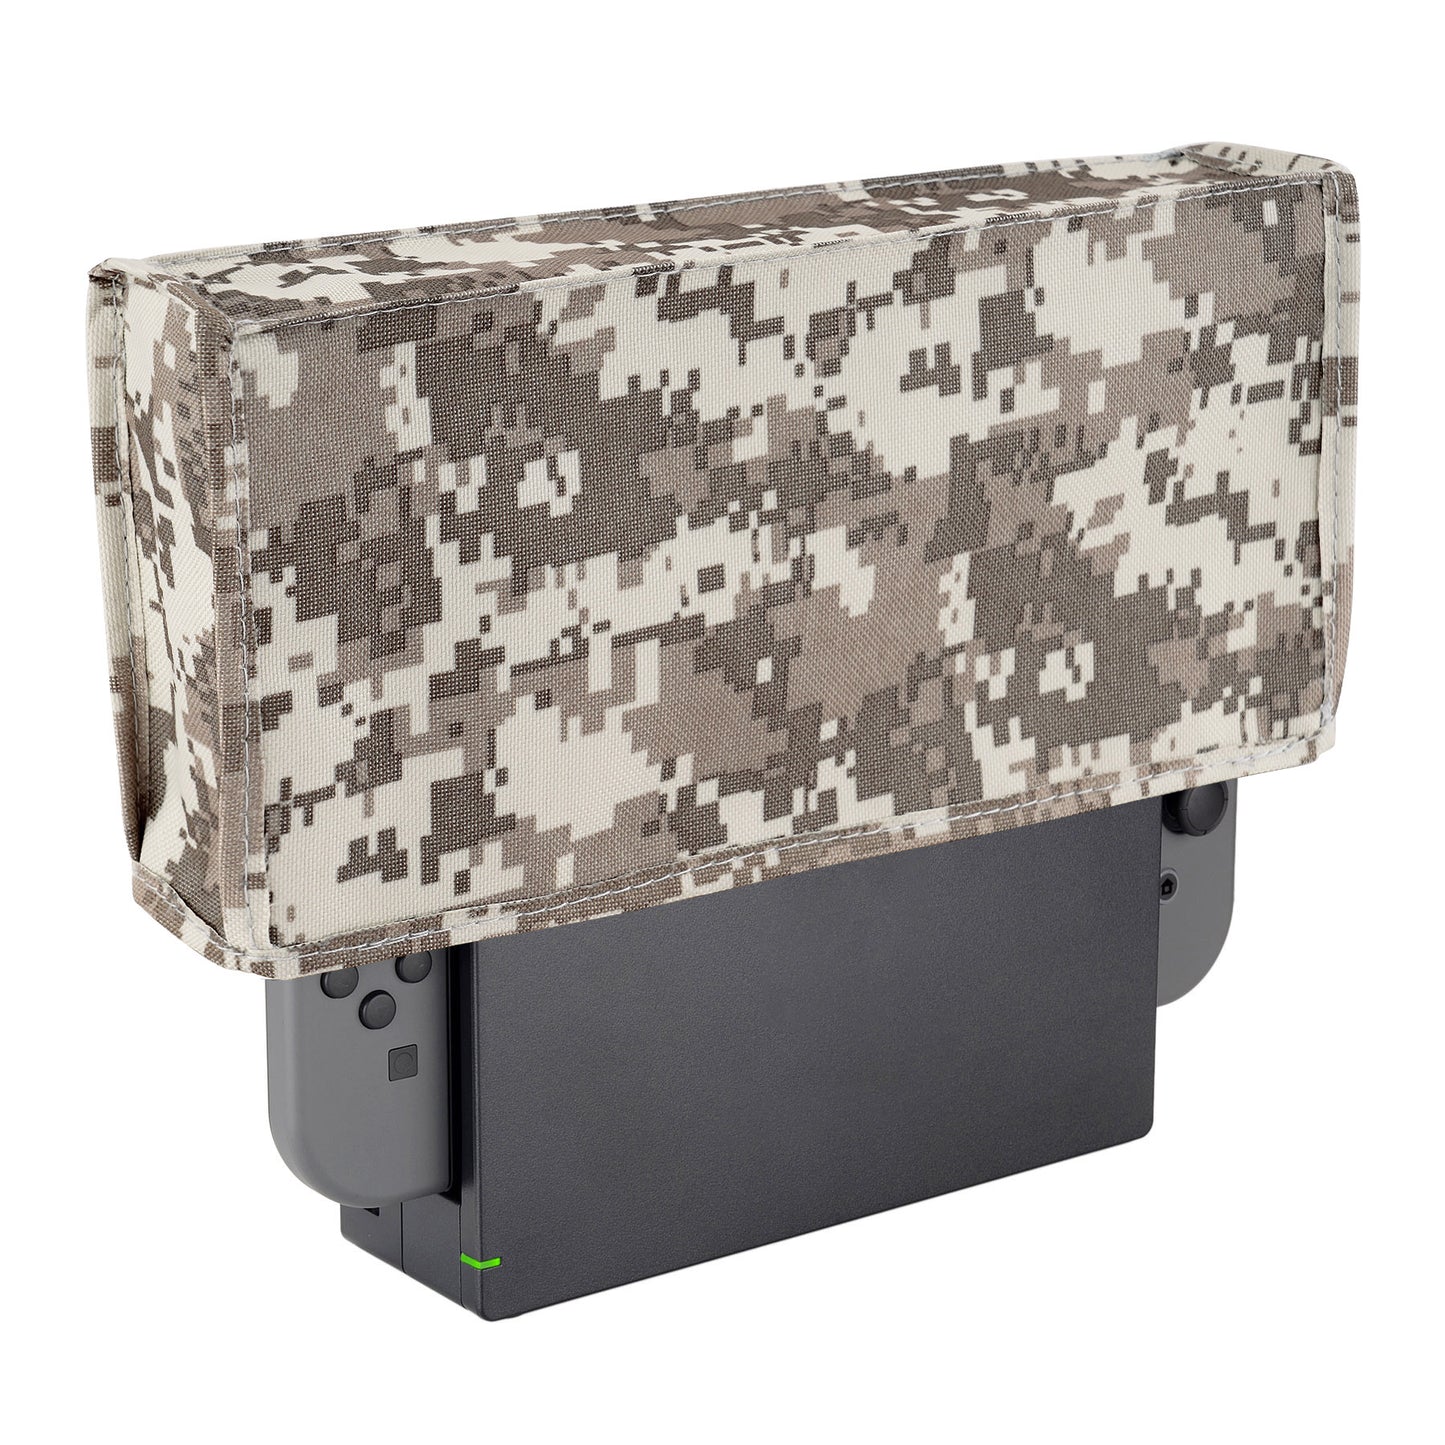 PlayVital Nylon Dust Cover, Soft Neat Lining Dust Guard, Anti Scratch Waterproof Cover Sleeve for Nintendo Switch & Switch OLED Charging Dock - Digital Camouflage - NTA8009 PlayVital